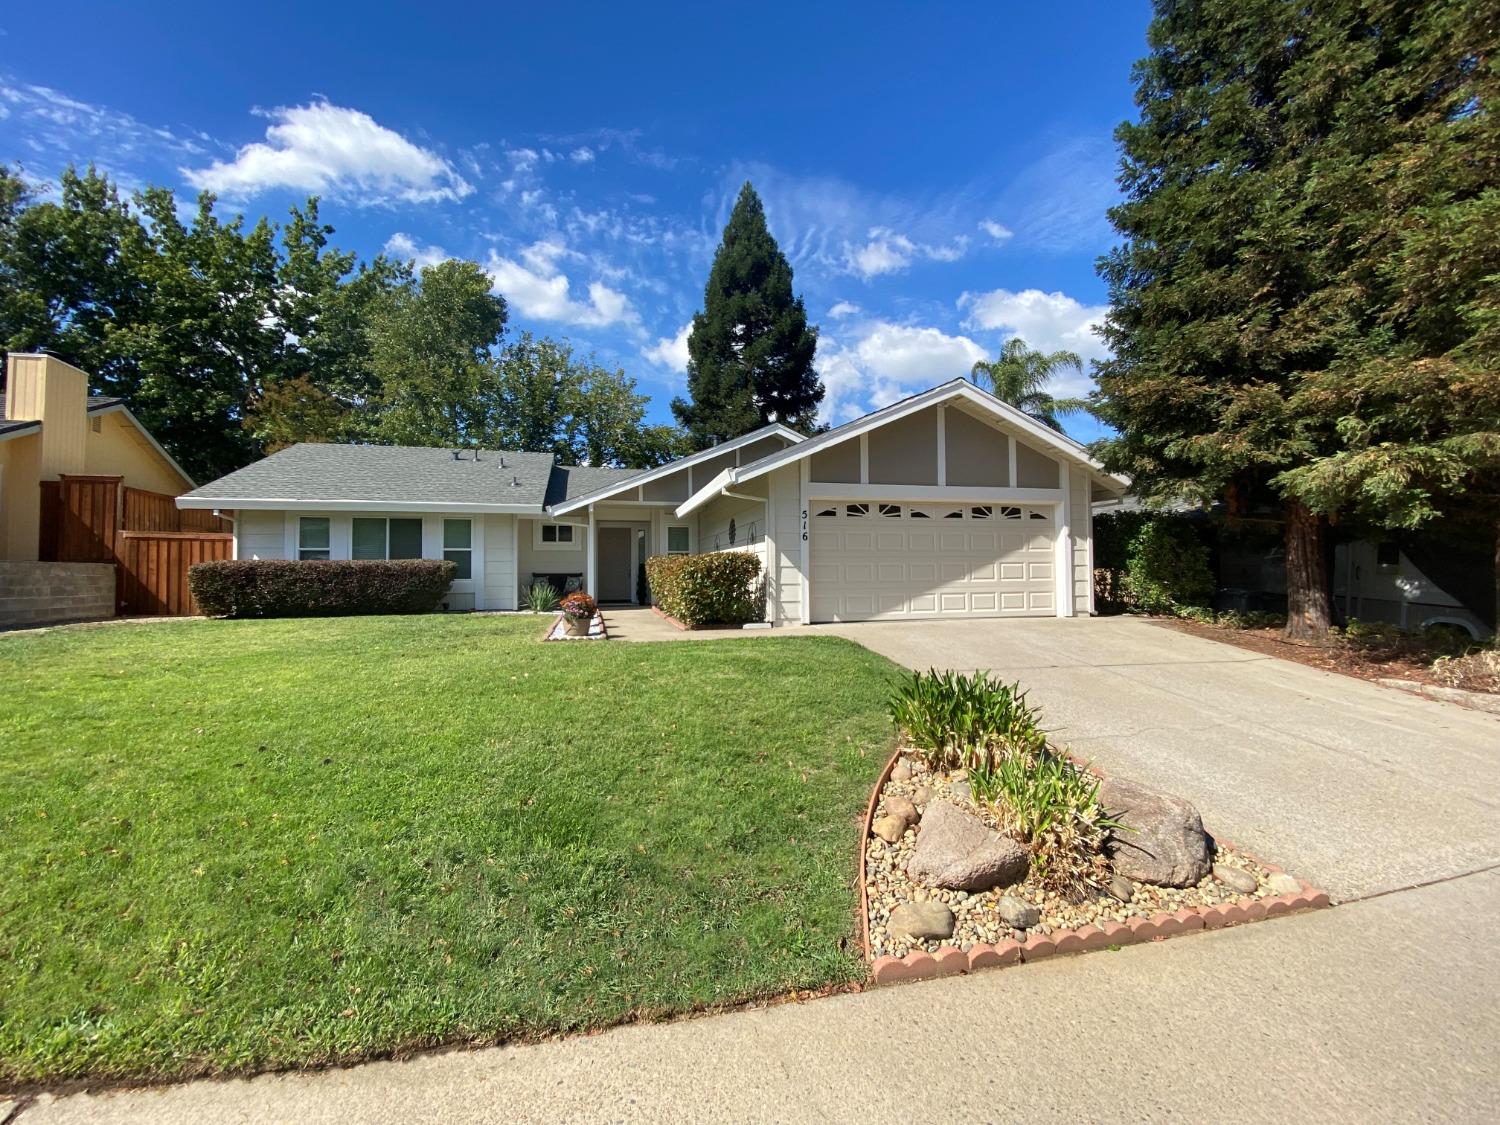 Adorable and updated home in the desirable Willow Creek Estates neighborhood. This is a location jackpot- Close to schools, parks, shopping and great recreational areas. All the hard work is done and its ready for someone to love it! It won't disappoint.